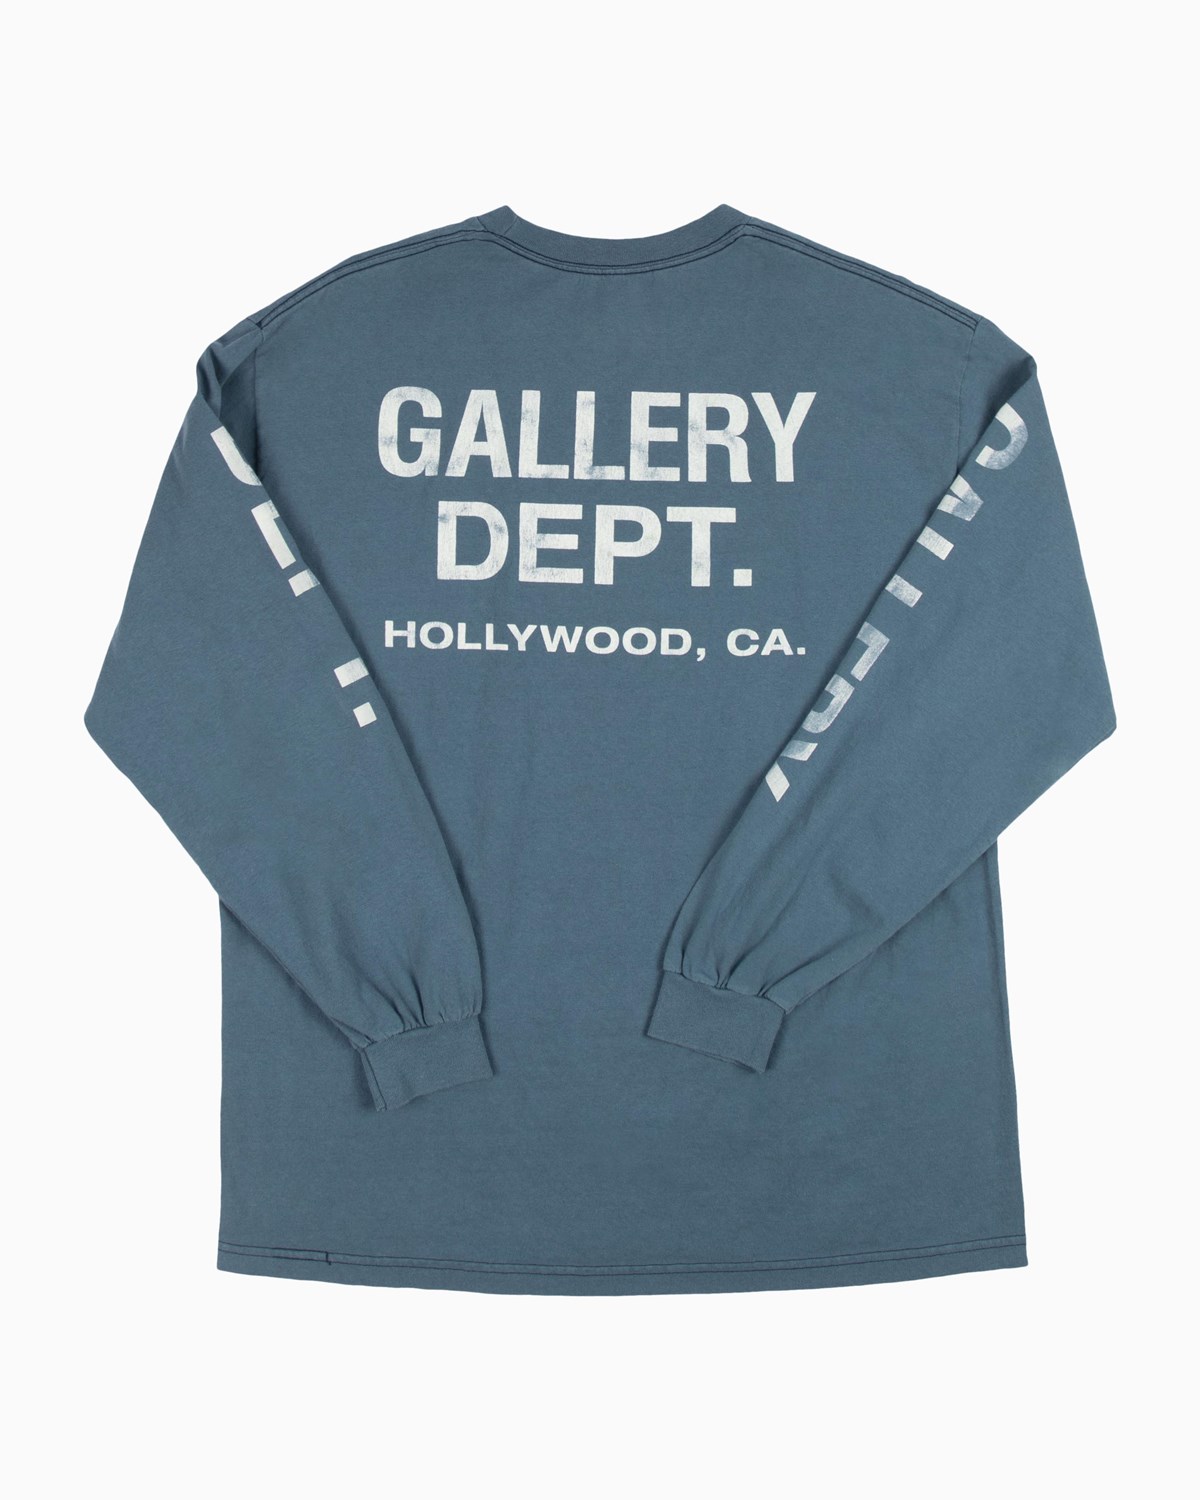 Collector L/S Tee GALLERY DEPT. Tops Long Sleeves Blue